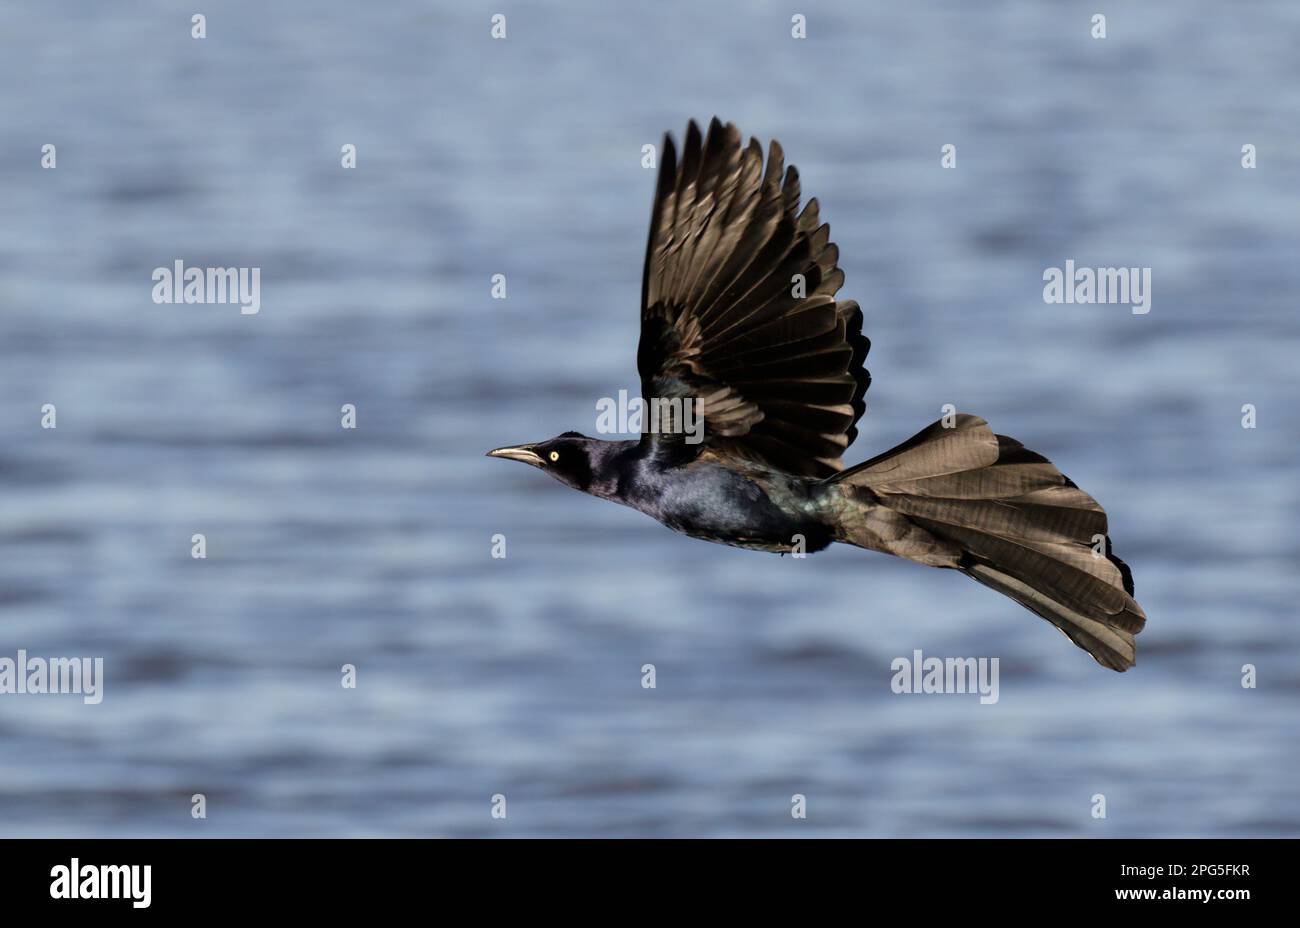 Great-tailed grackle (Quiscalus mexicanus) male flying over water, Galveston, Texas, USA. Stock Photo